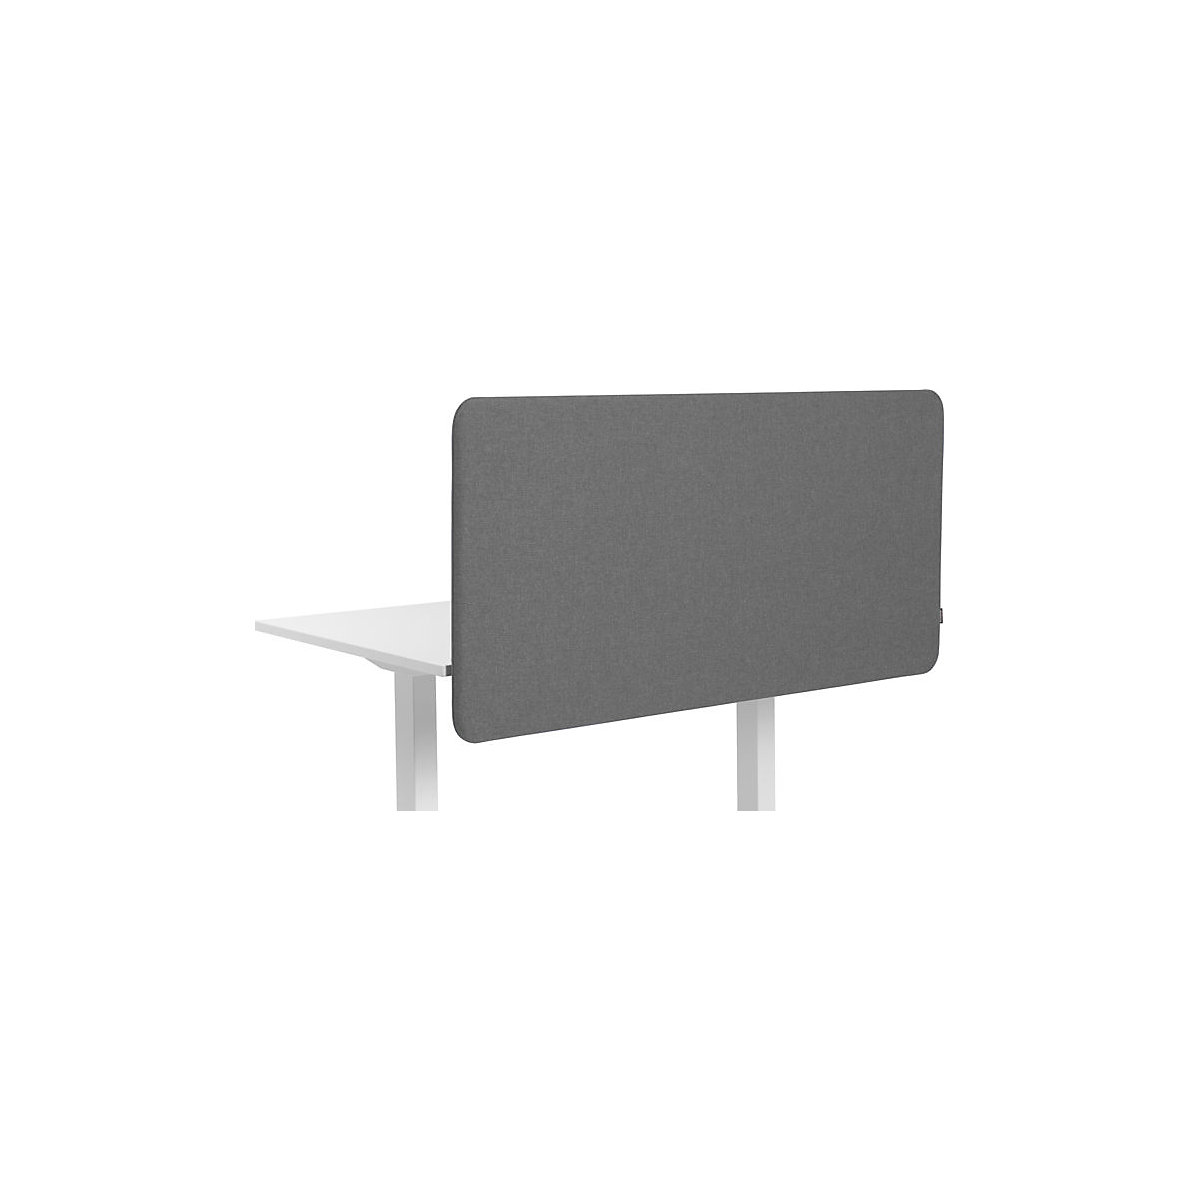 Softline Salsa acoustic desk partition, suspended downwards, HxW 650 x 1000 mm, fabric, grey-1